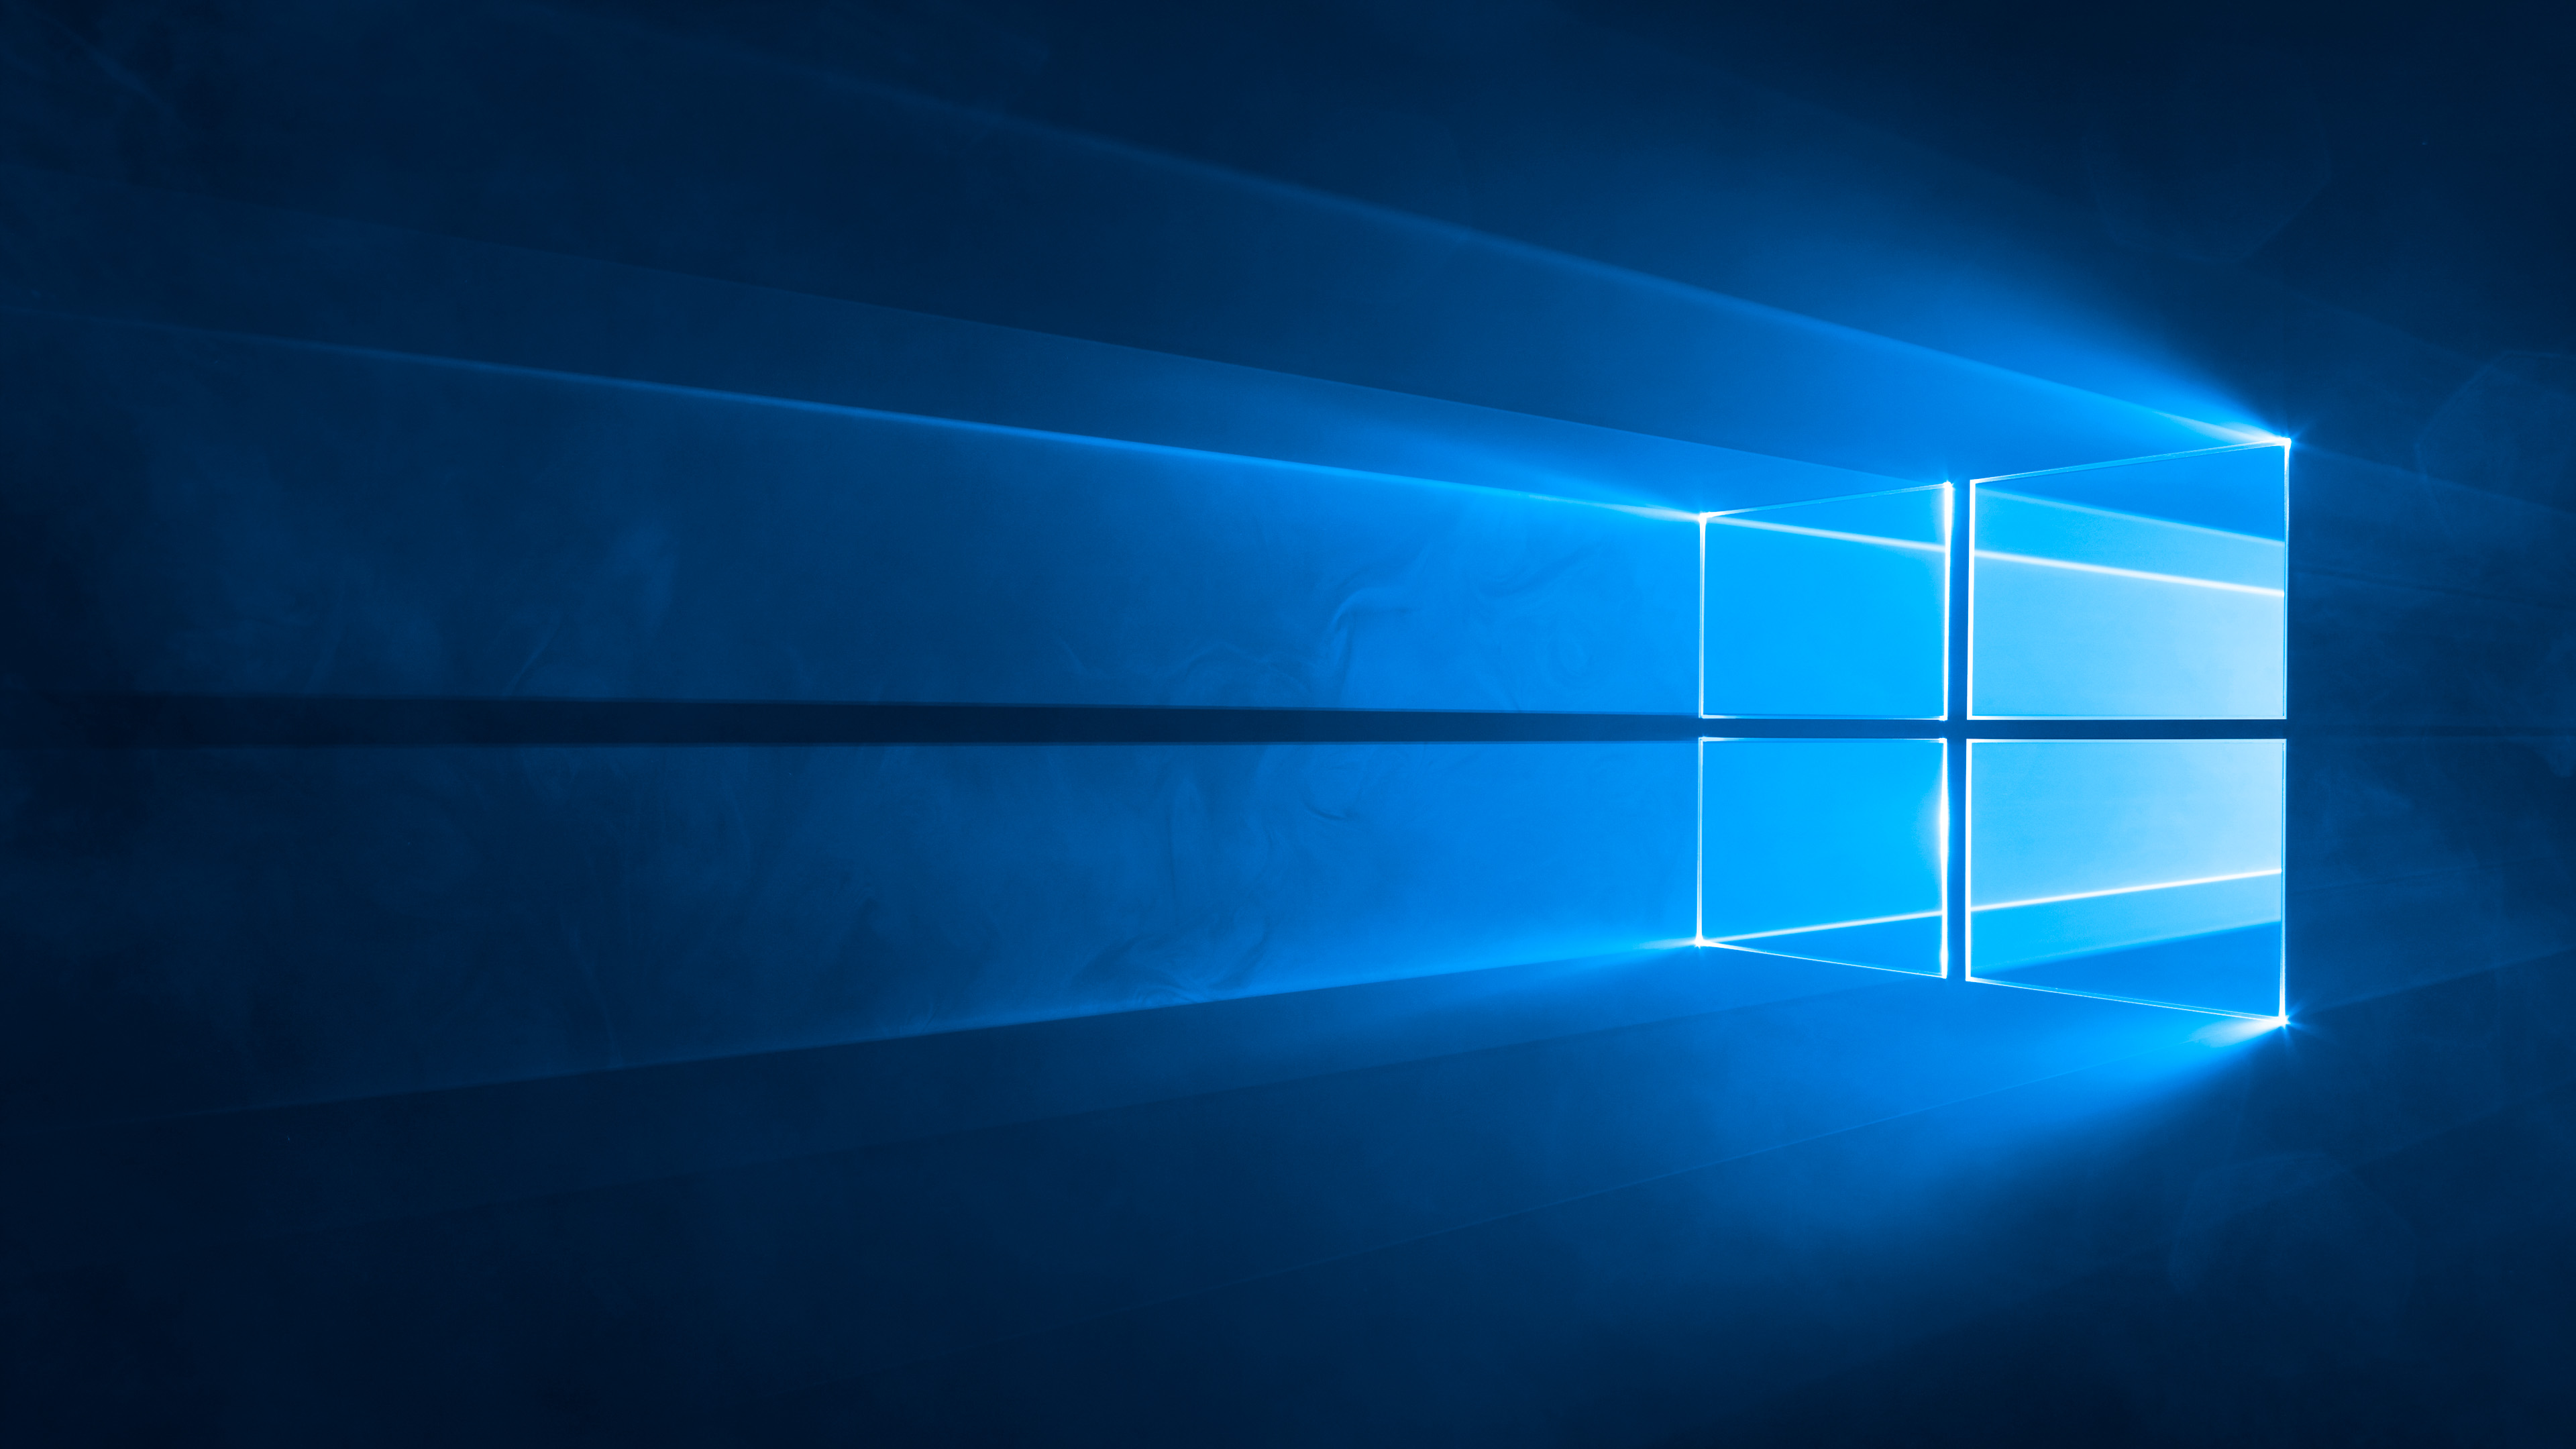 The Stock Windows Wallpaper For Your Tablet Or